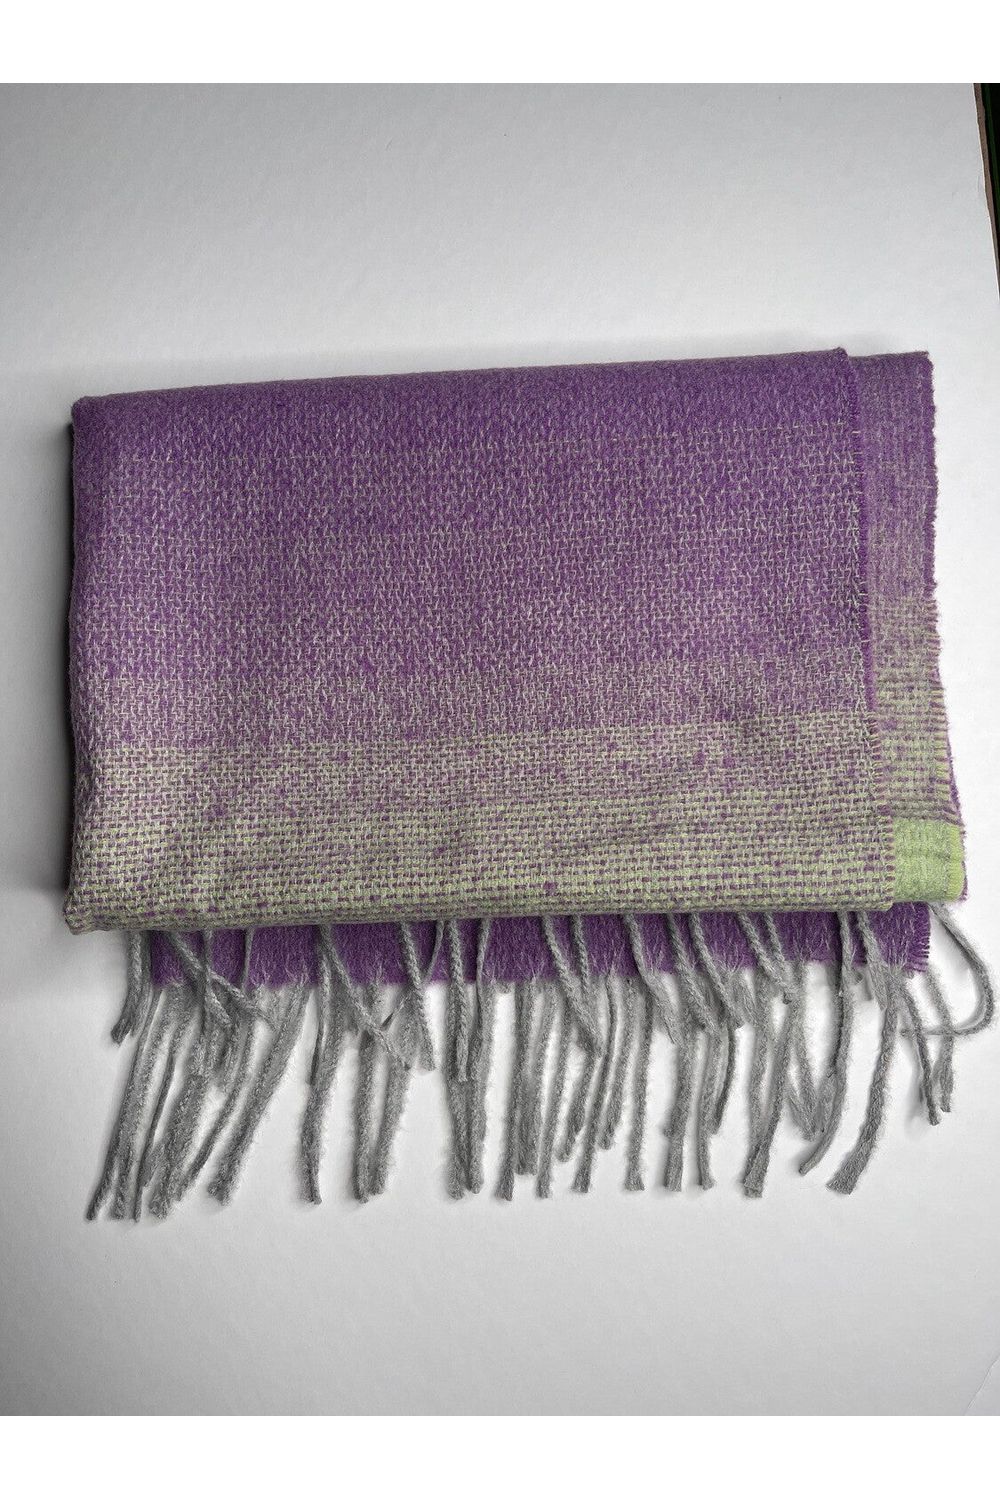 Rectangular scarf in purple and green gradient color